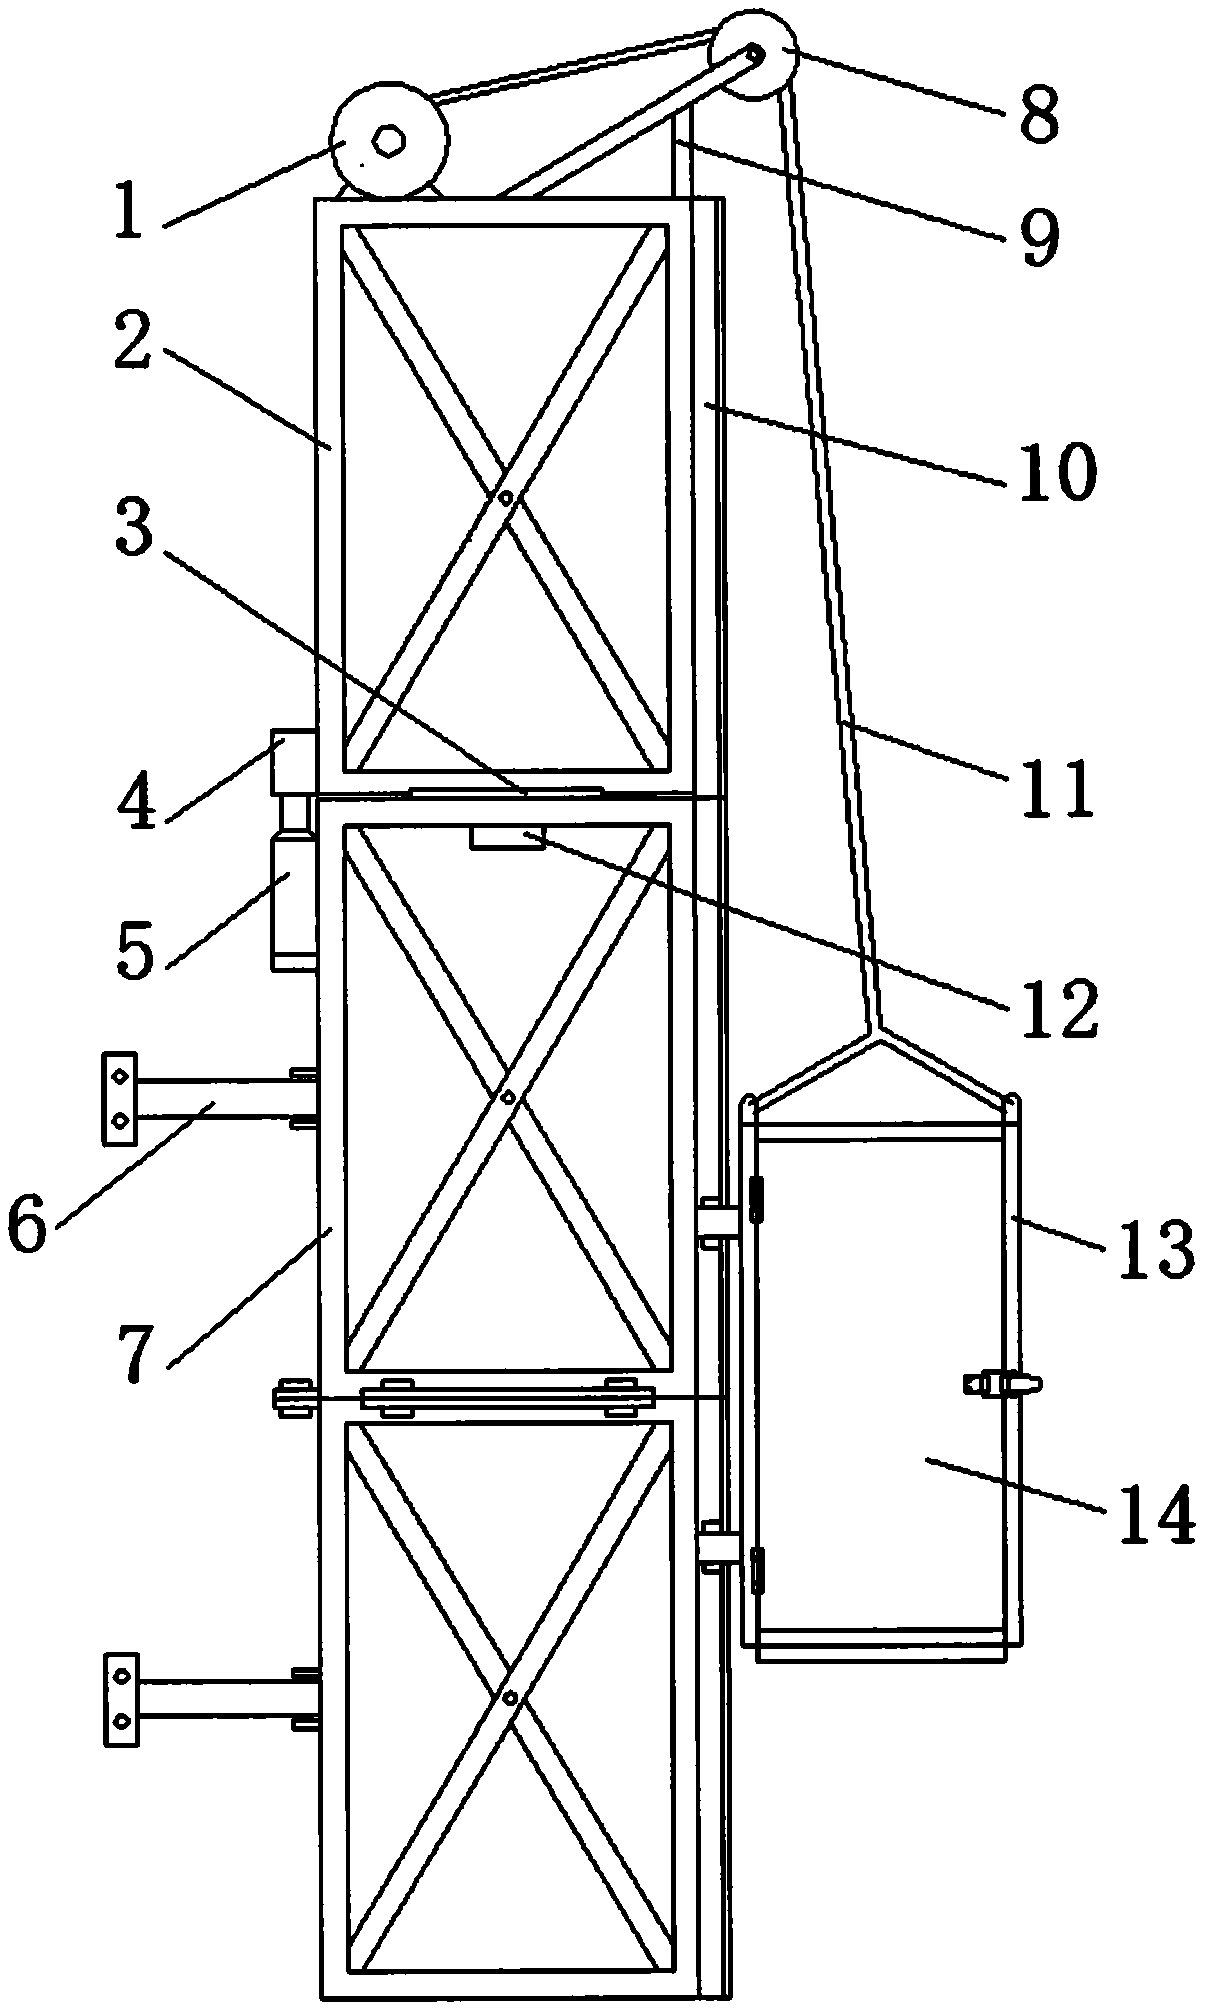 Hoisting device for house construction